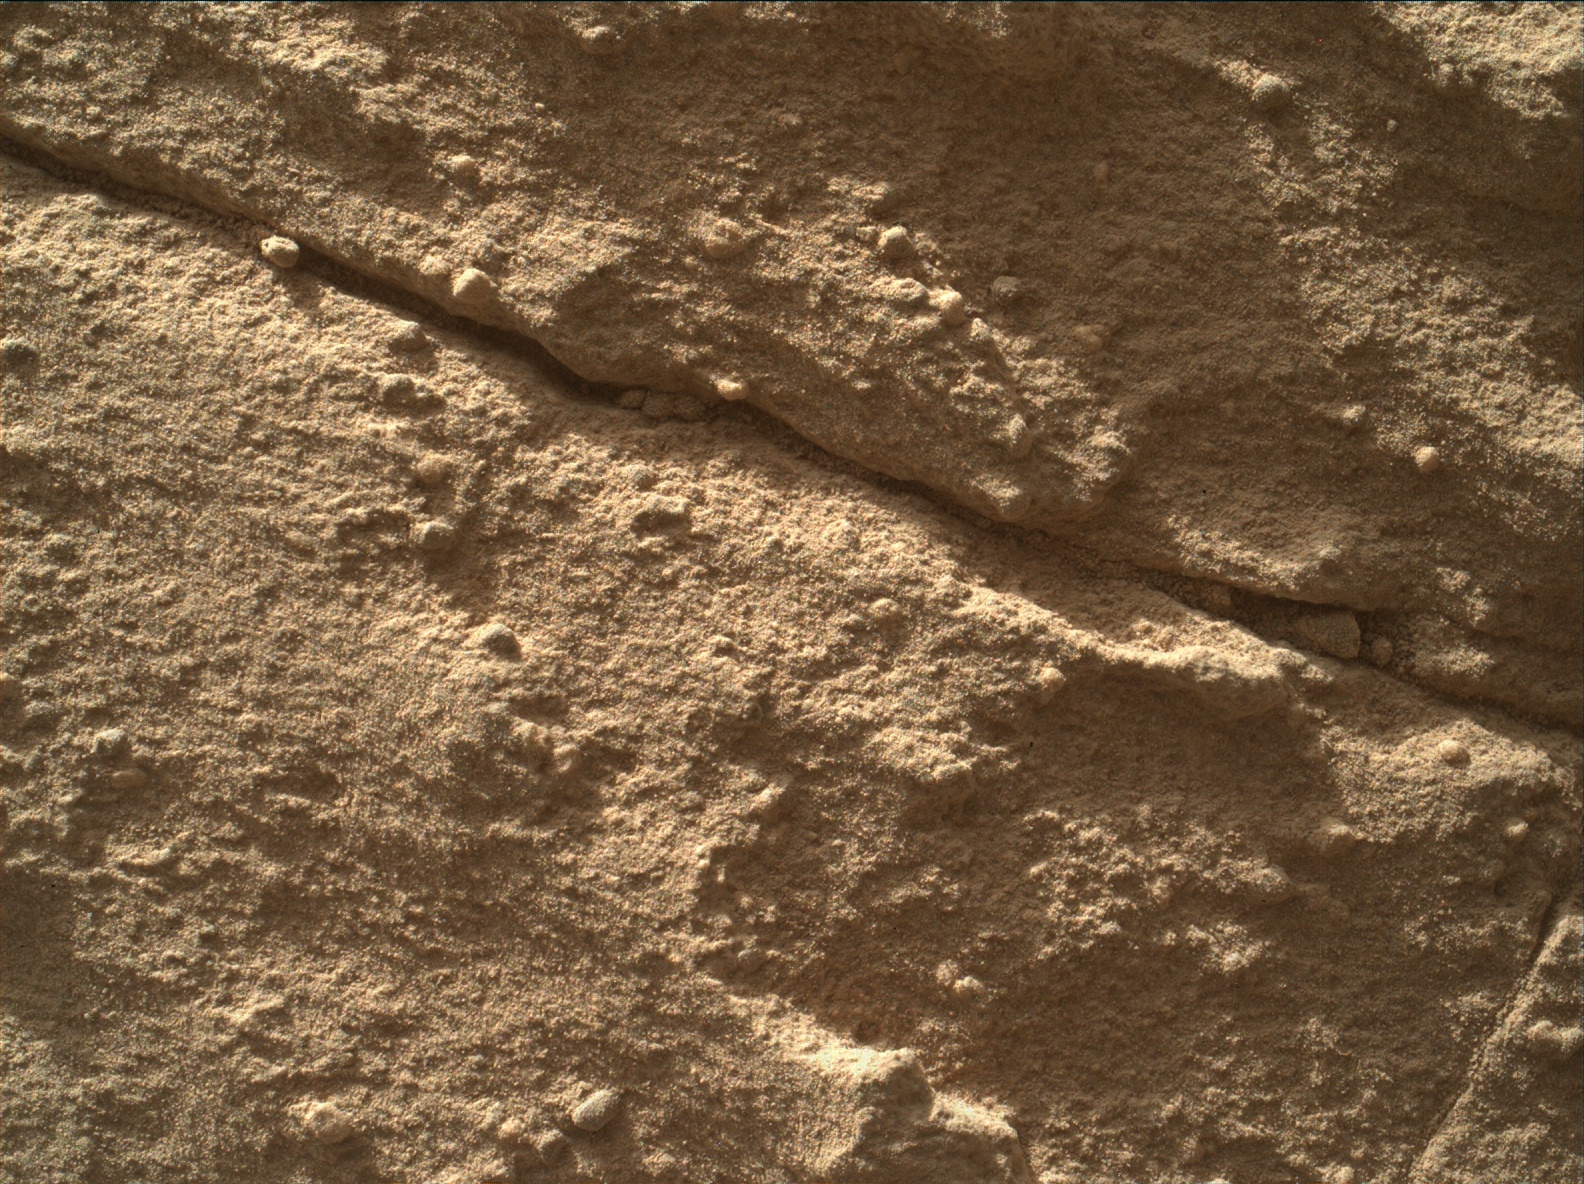 Nasa's Mars rover Curiosity acquired this image using its Mars Hand Lens Imager (MAHLI) on Sol 1300